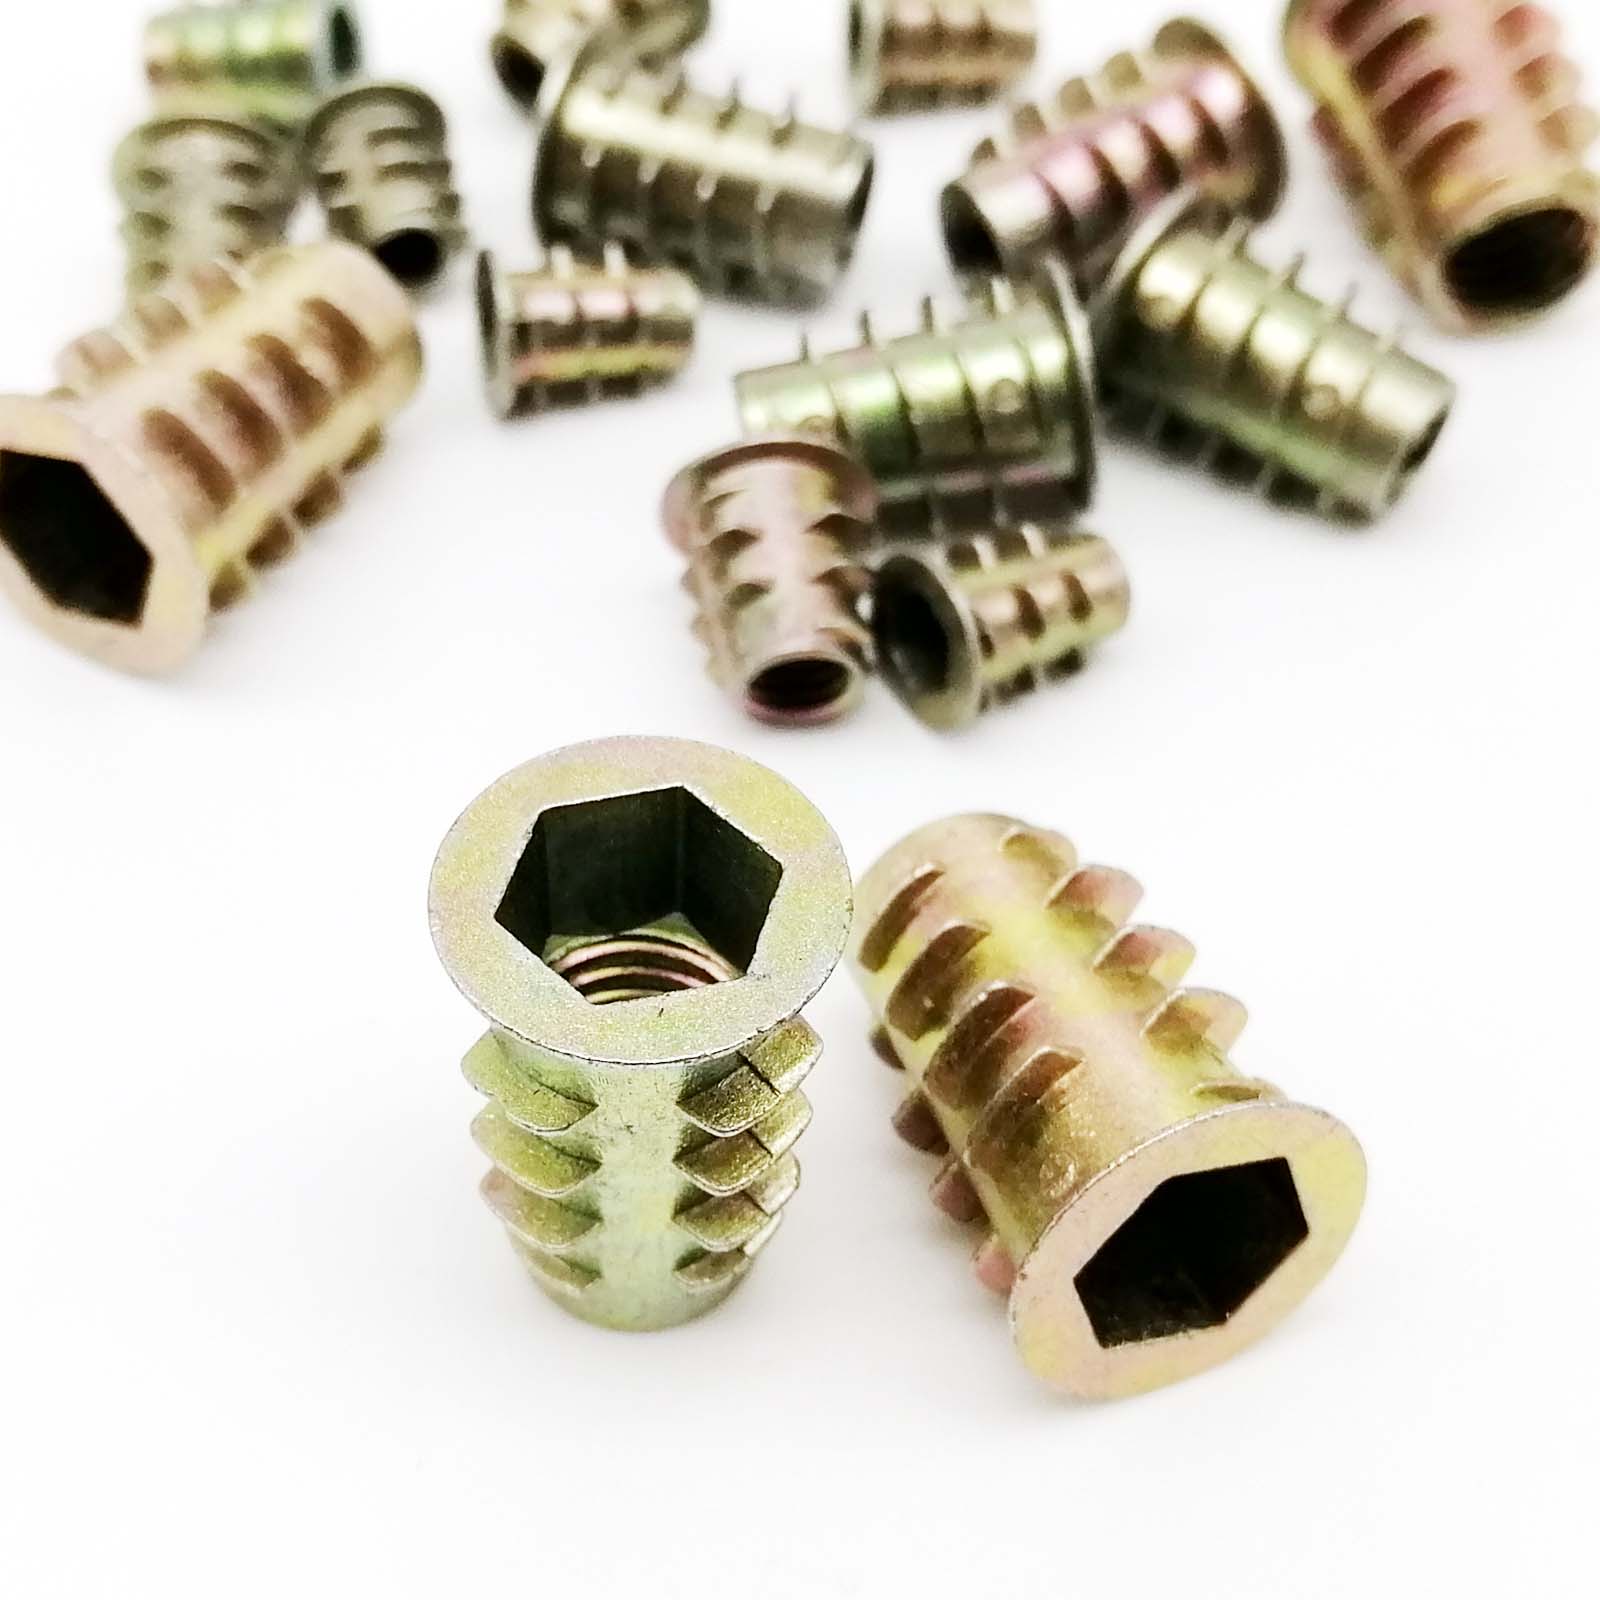 50Pcs Insert Nuts Zinc Alloy M4/M5/M6/M8/M10 Hex Socket Screw-in Type Used for Office Appliance Industry 